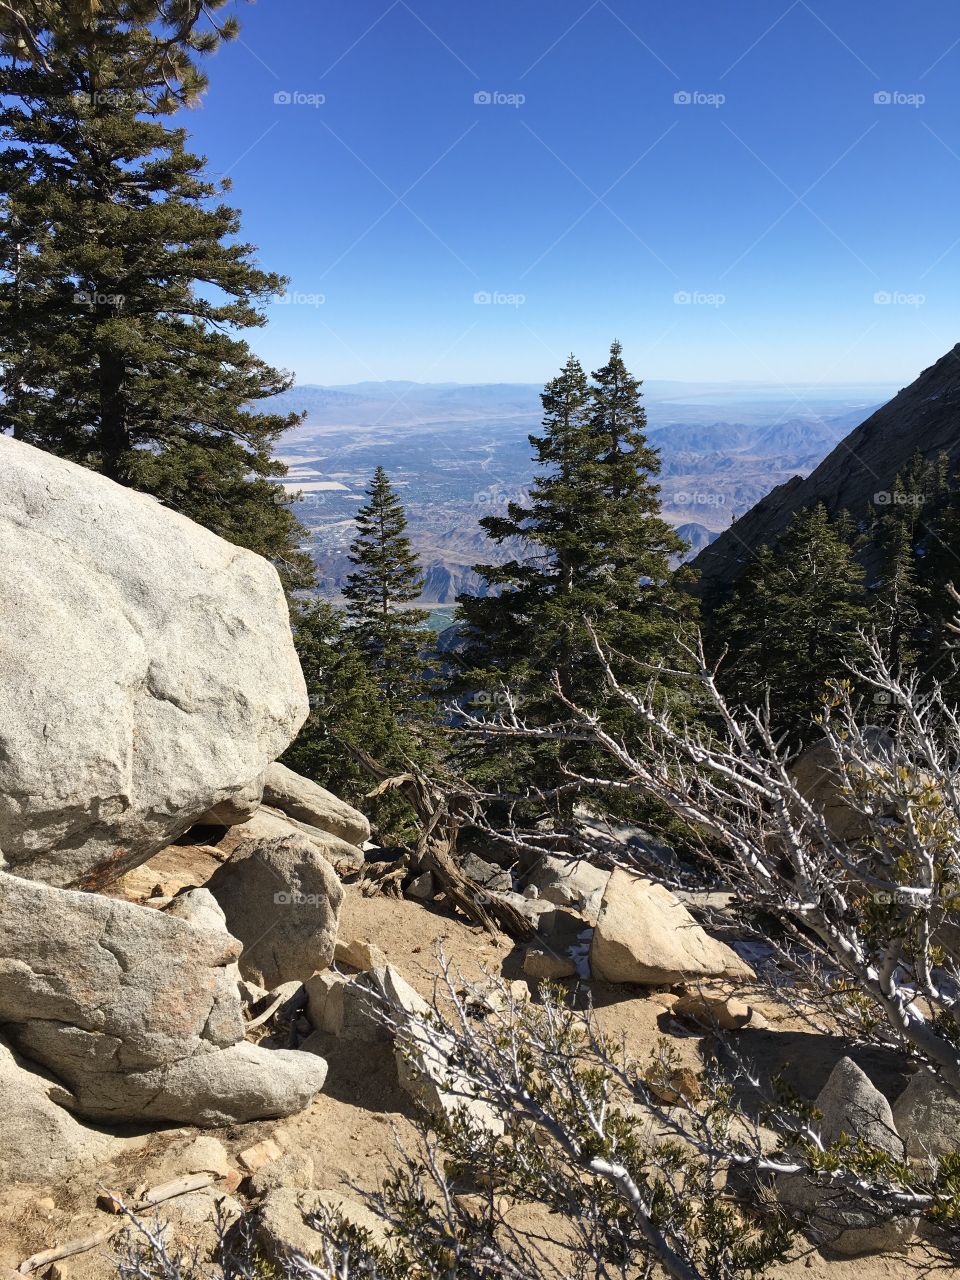 Palm Springs Aerial Tram - Mount San Jacinto State Park (View of the Desert Cities)